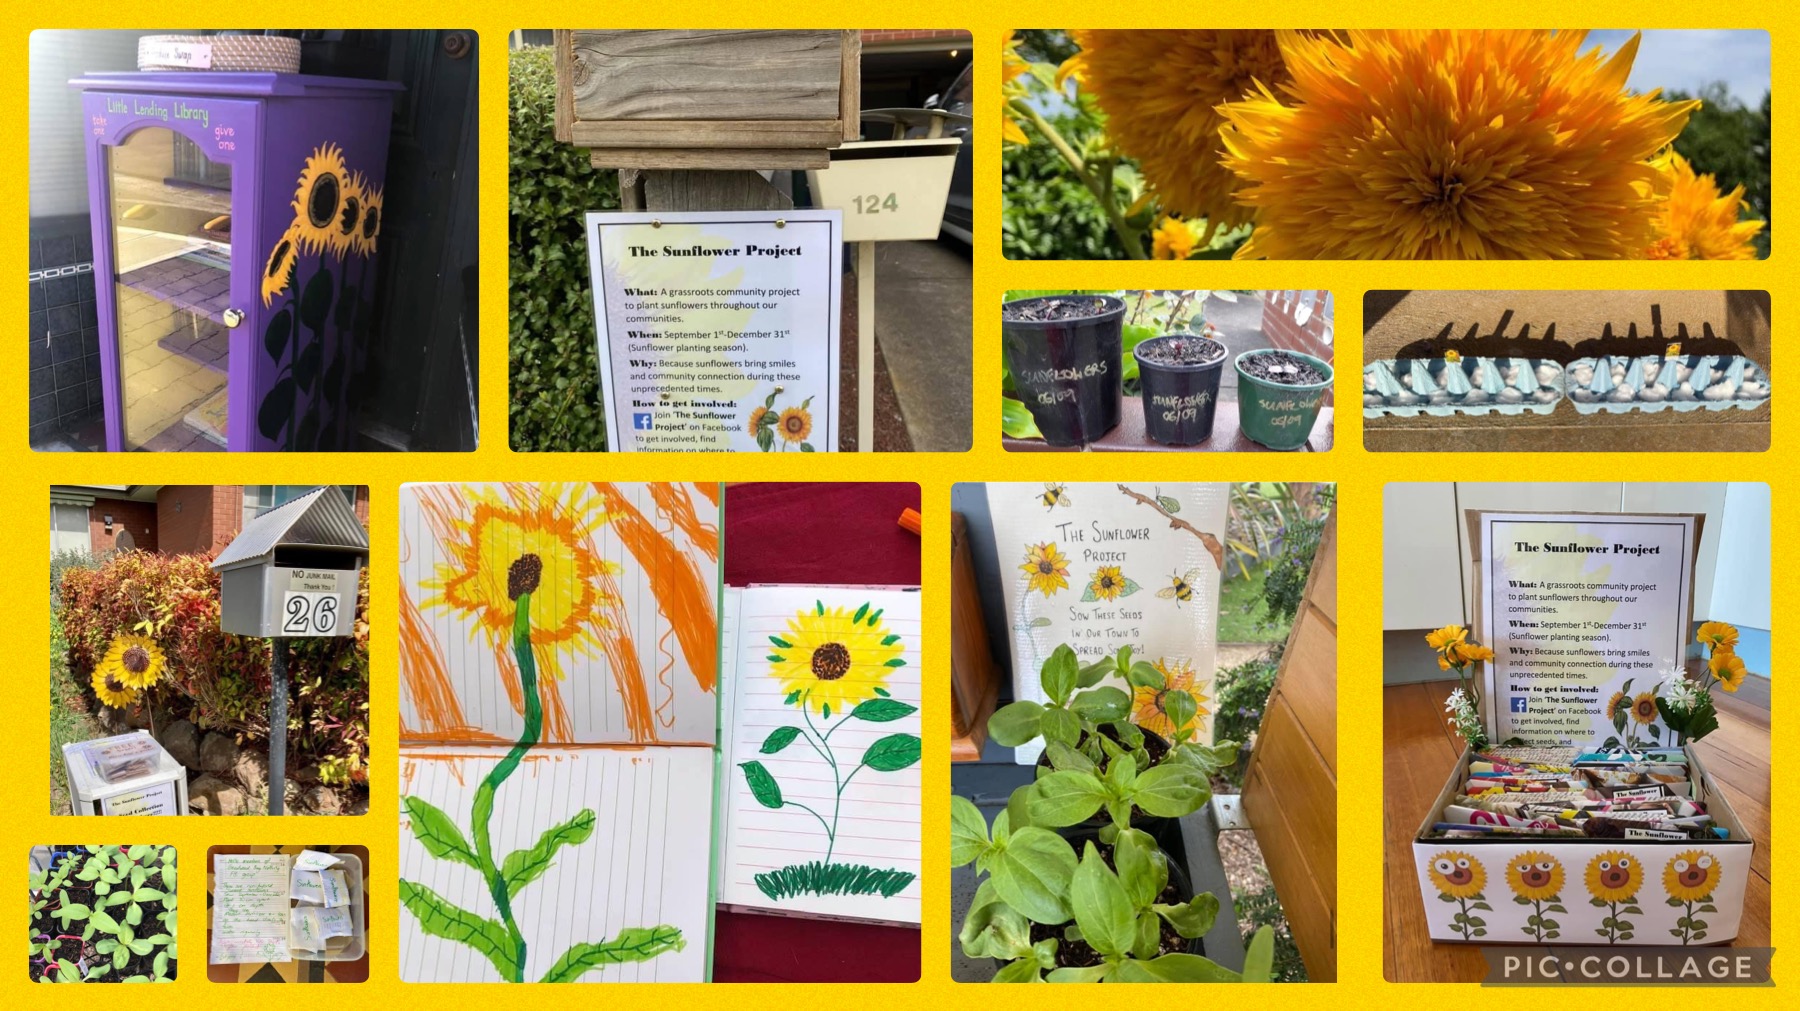 A montage of photos relating to sunflowers including drawings, painted boxes, gardens and signs.